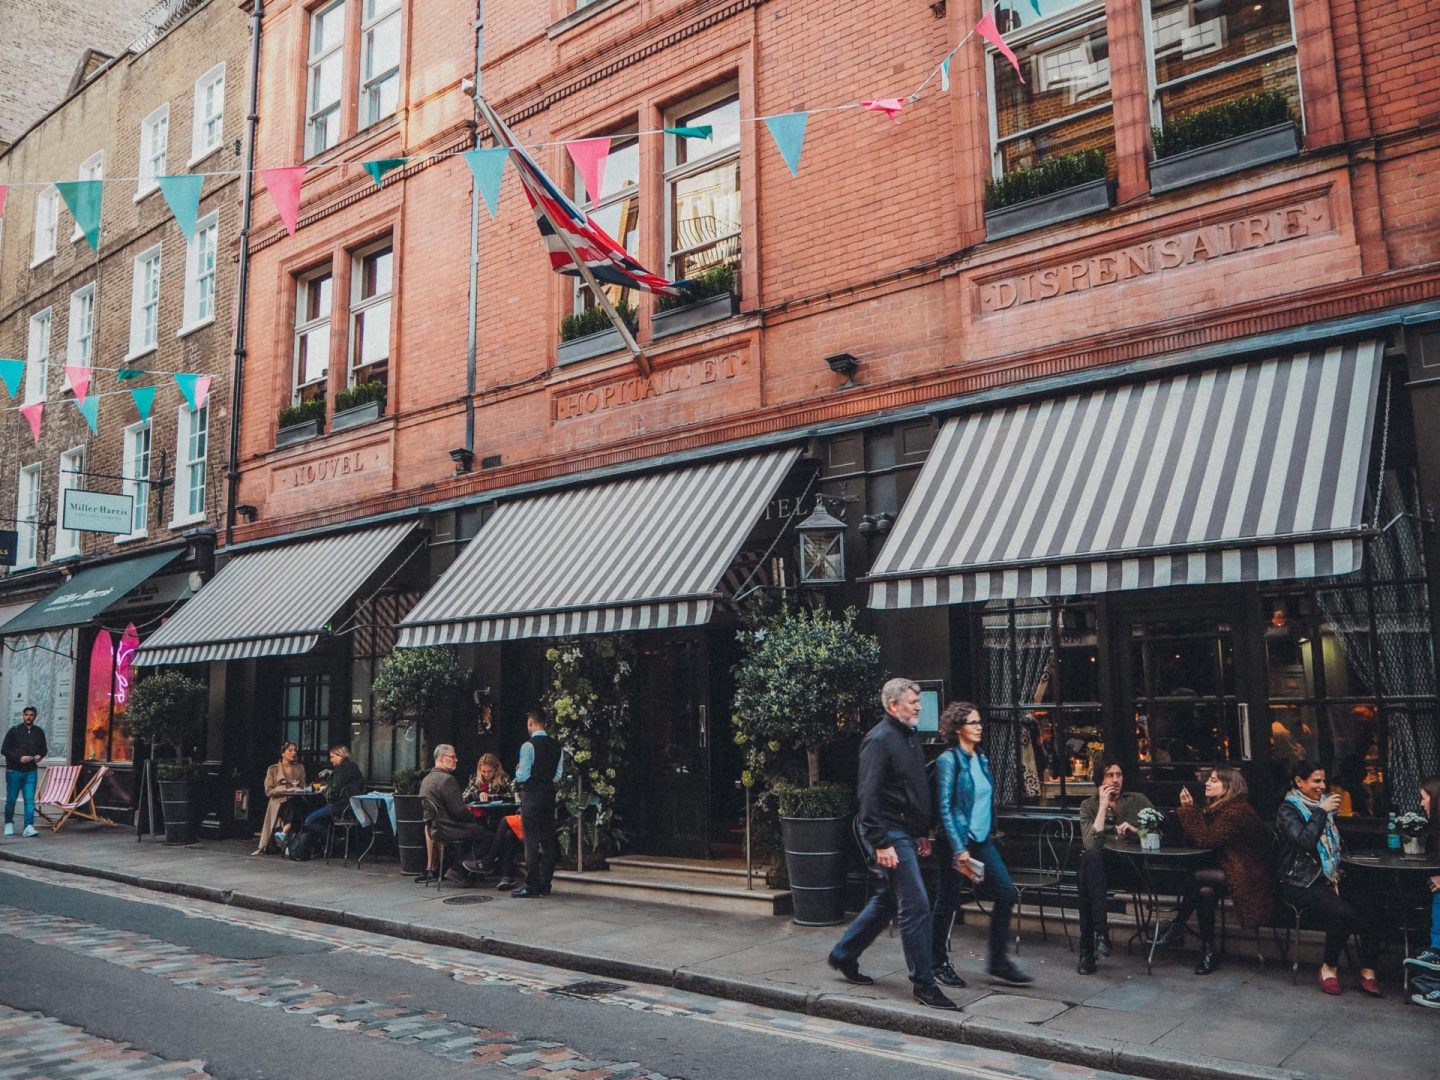 My travel guide to Covent Garden, London